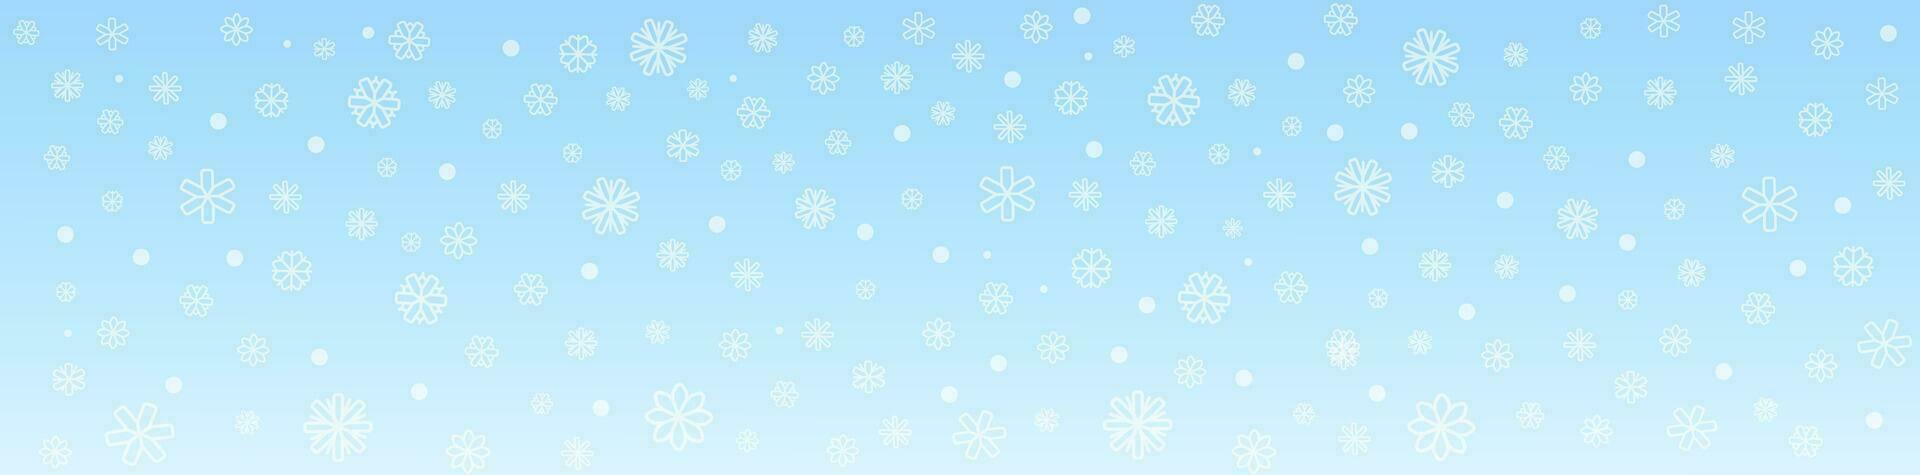 Horizontal background with snowflakes and snowfall. Abstract light blue  background. Christmas backdrop. Winter Christmas and New Year background. Vector illustration.